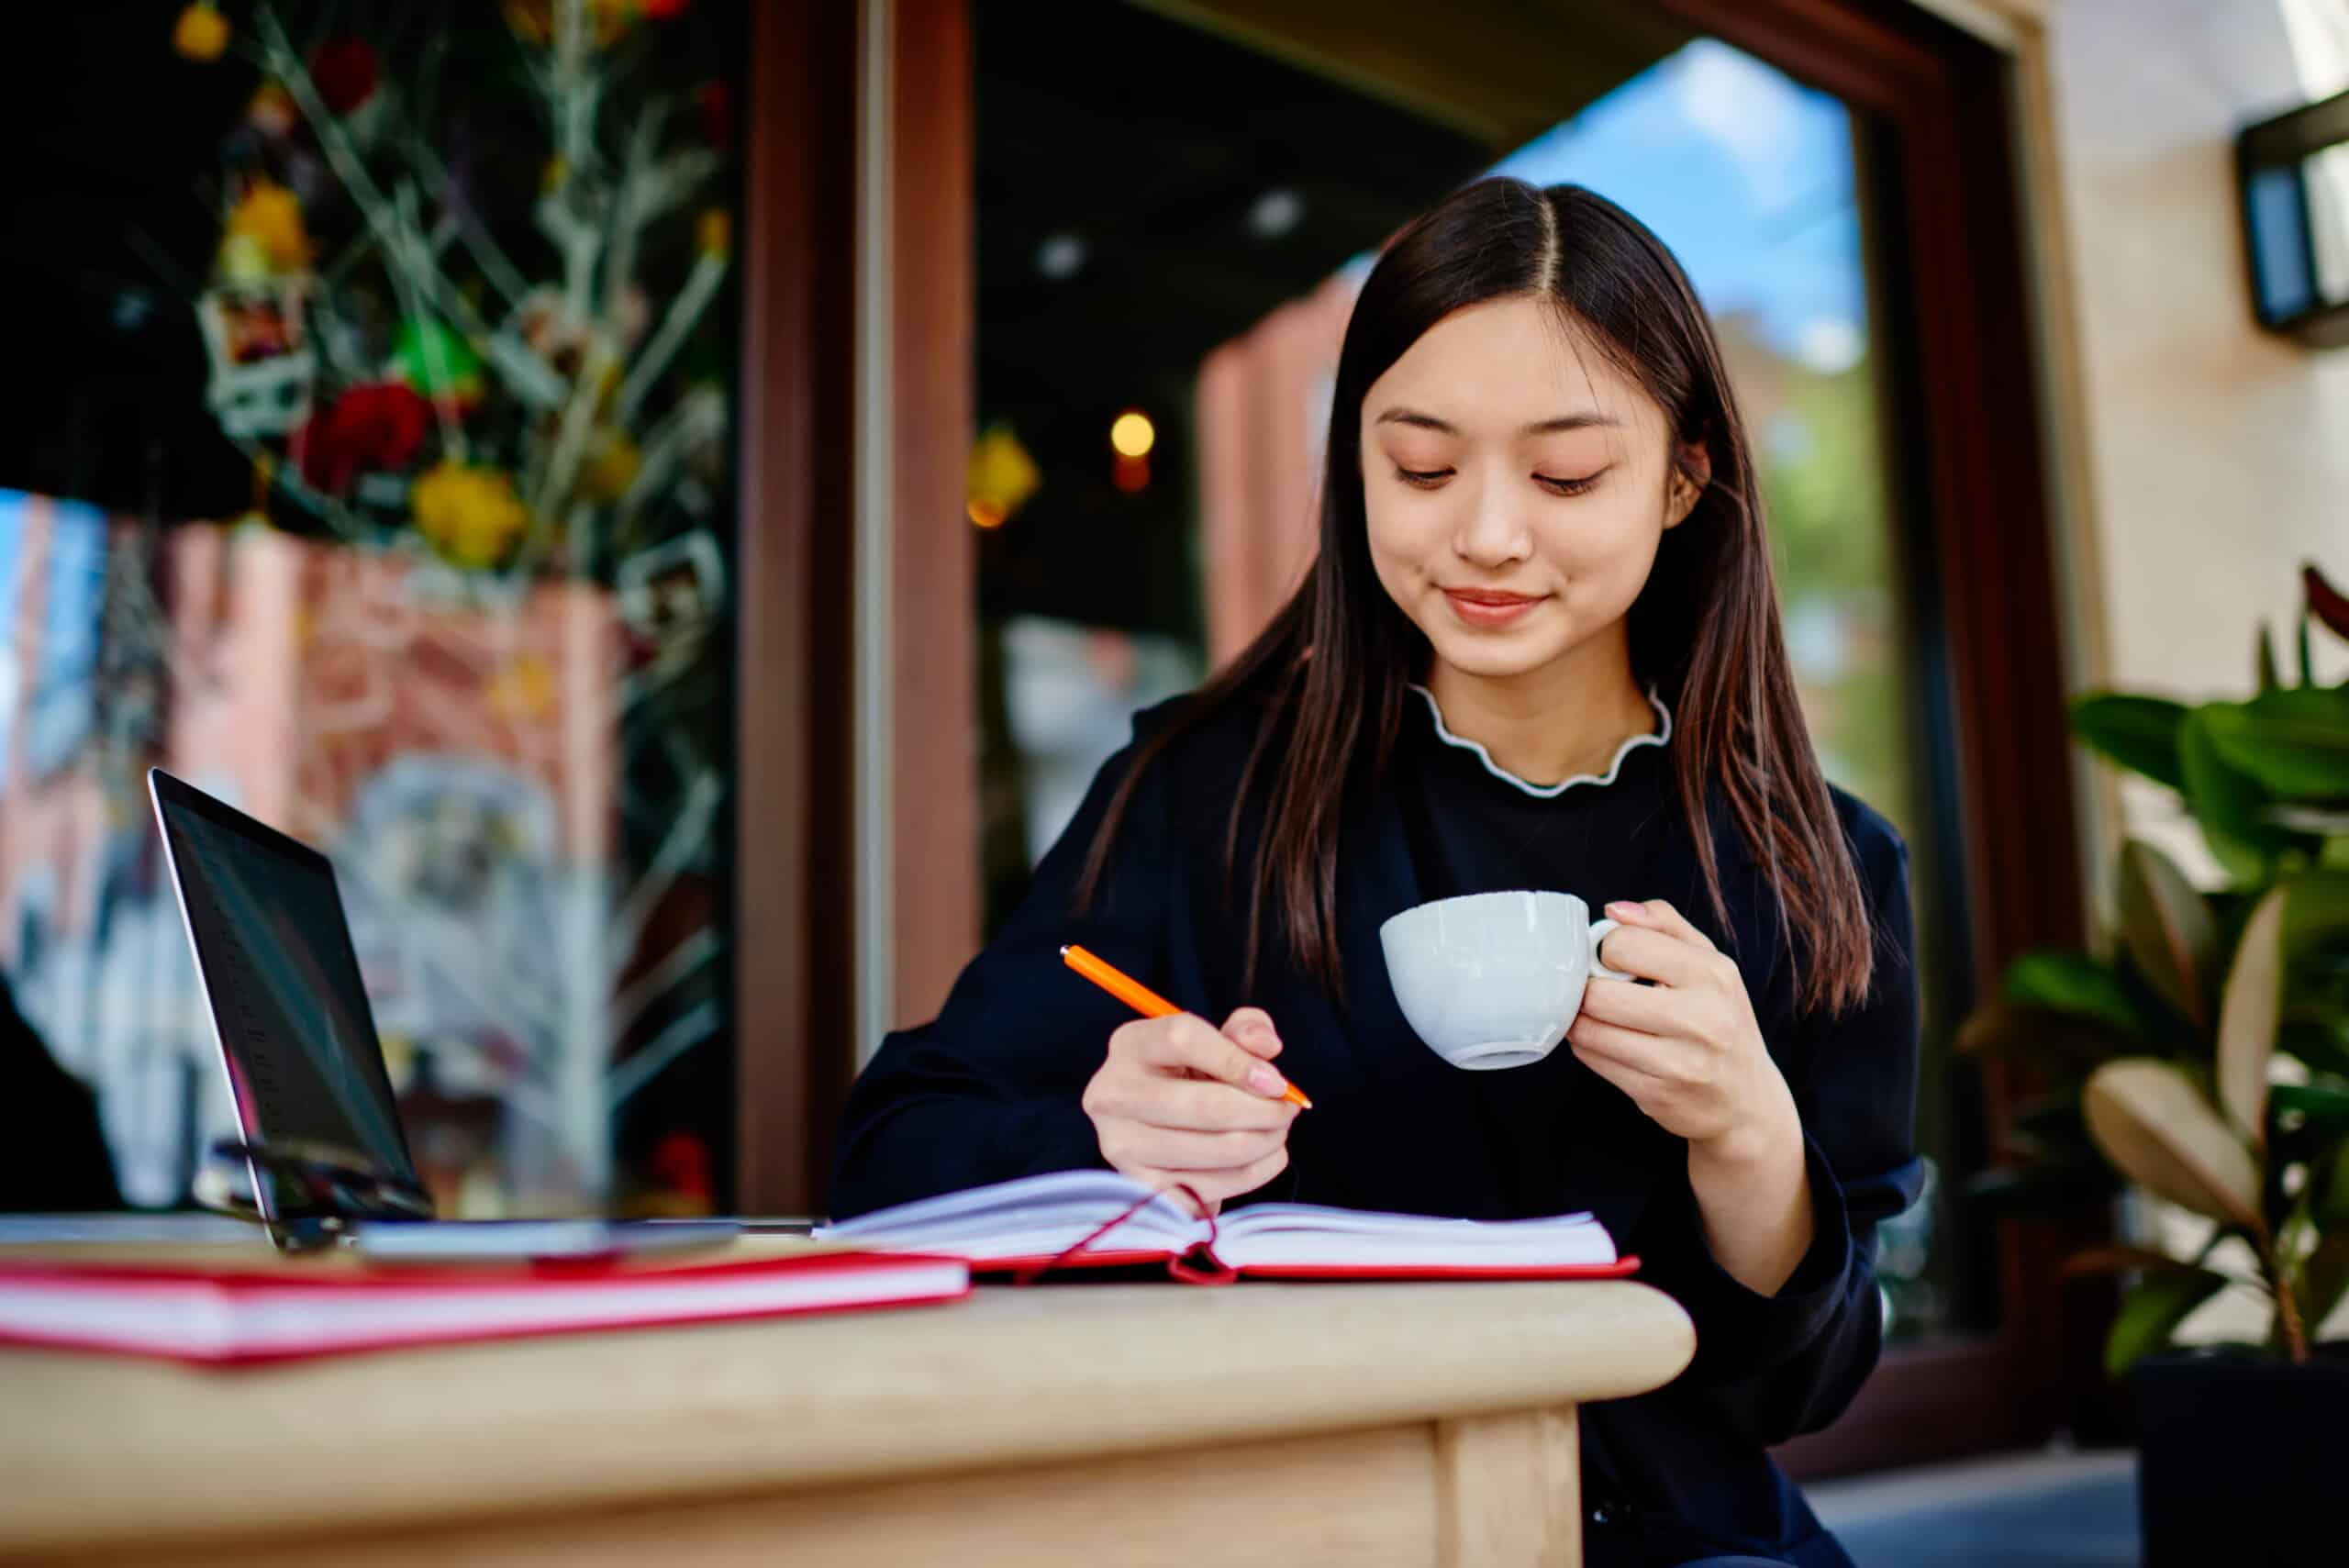 Asian woman writing in her notebook while drinking coffee.